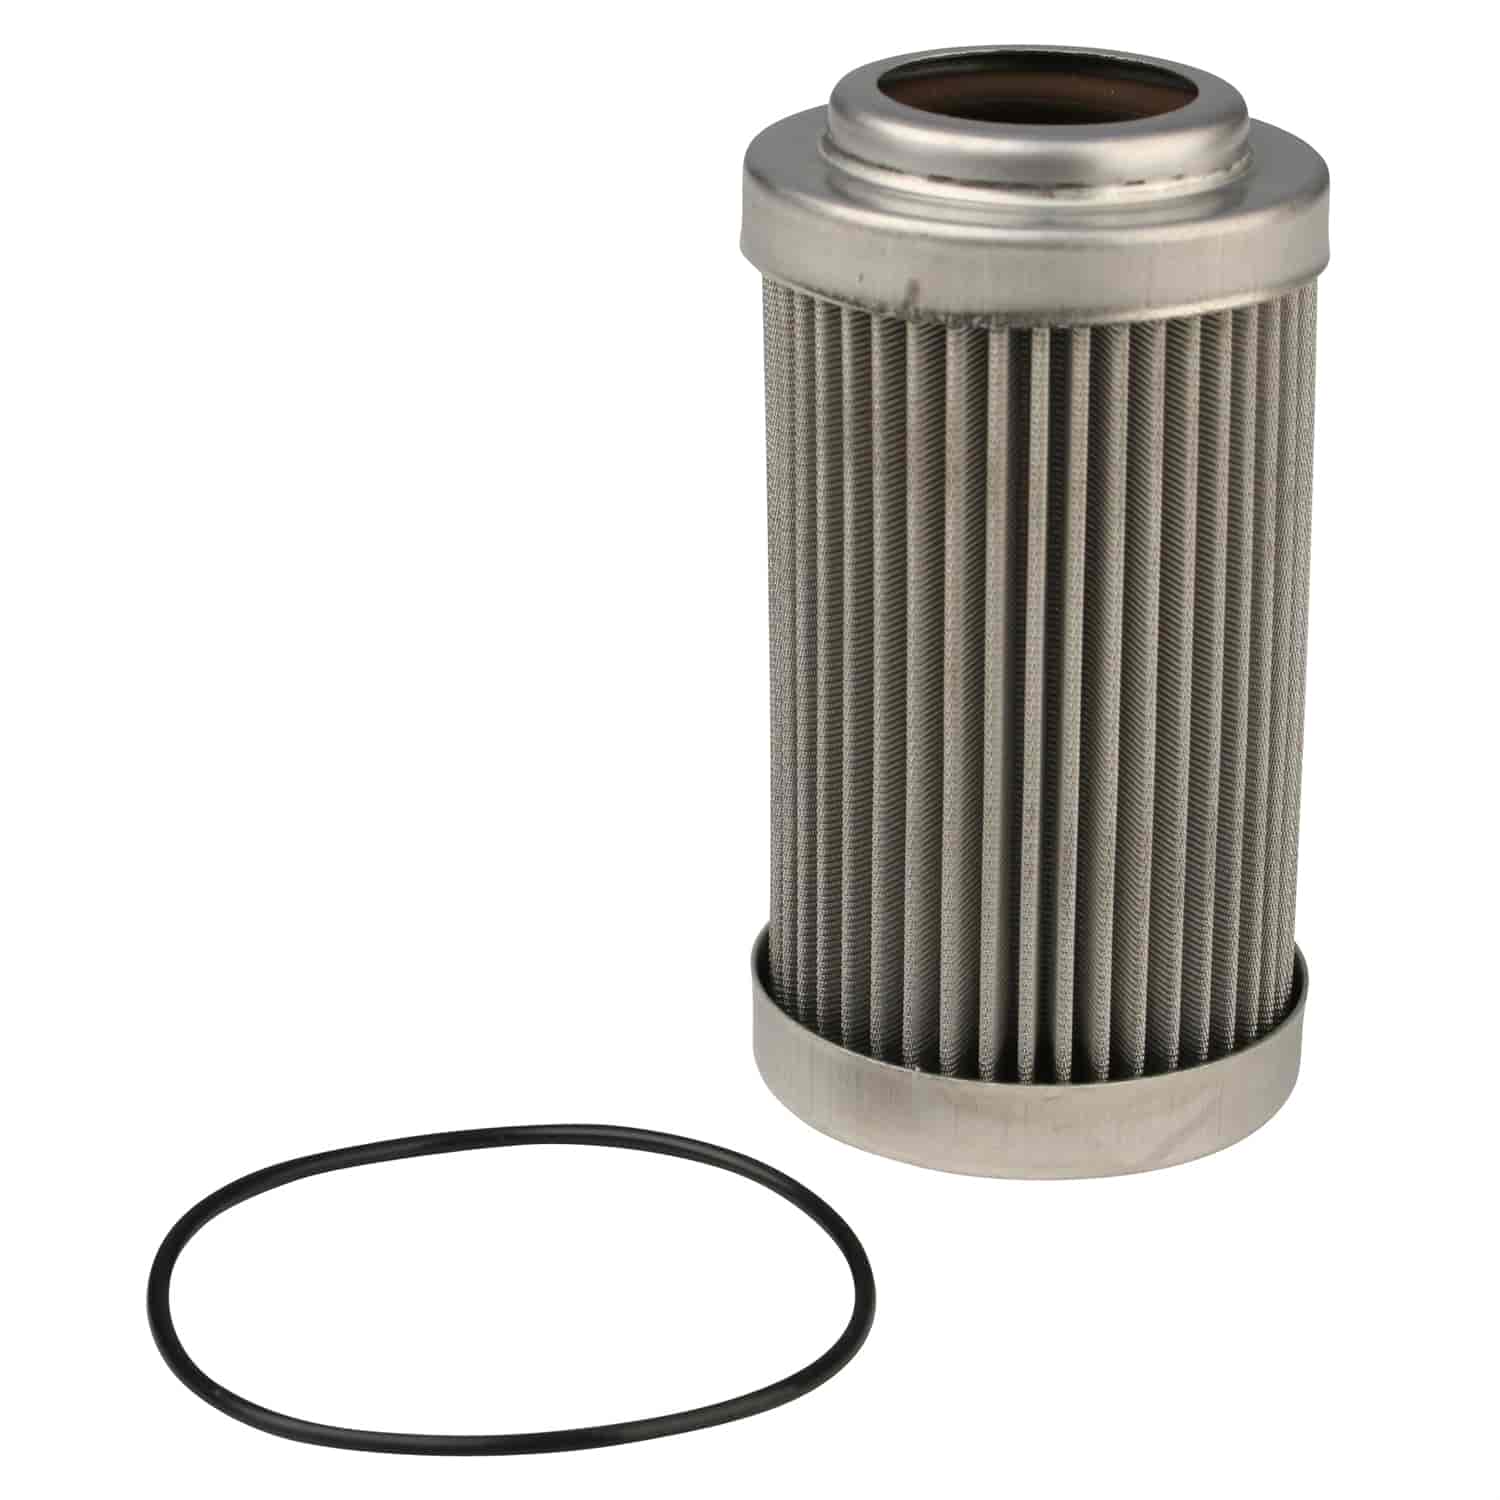 Replacement Fuel Filter Element 40 micron for part #027-12335